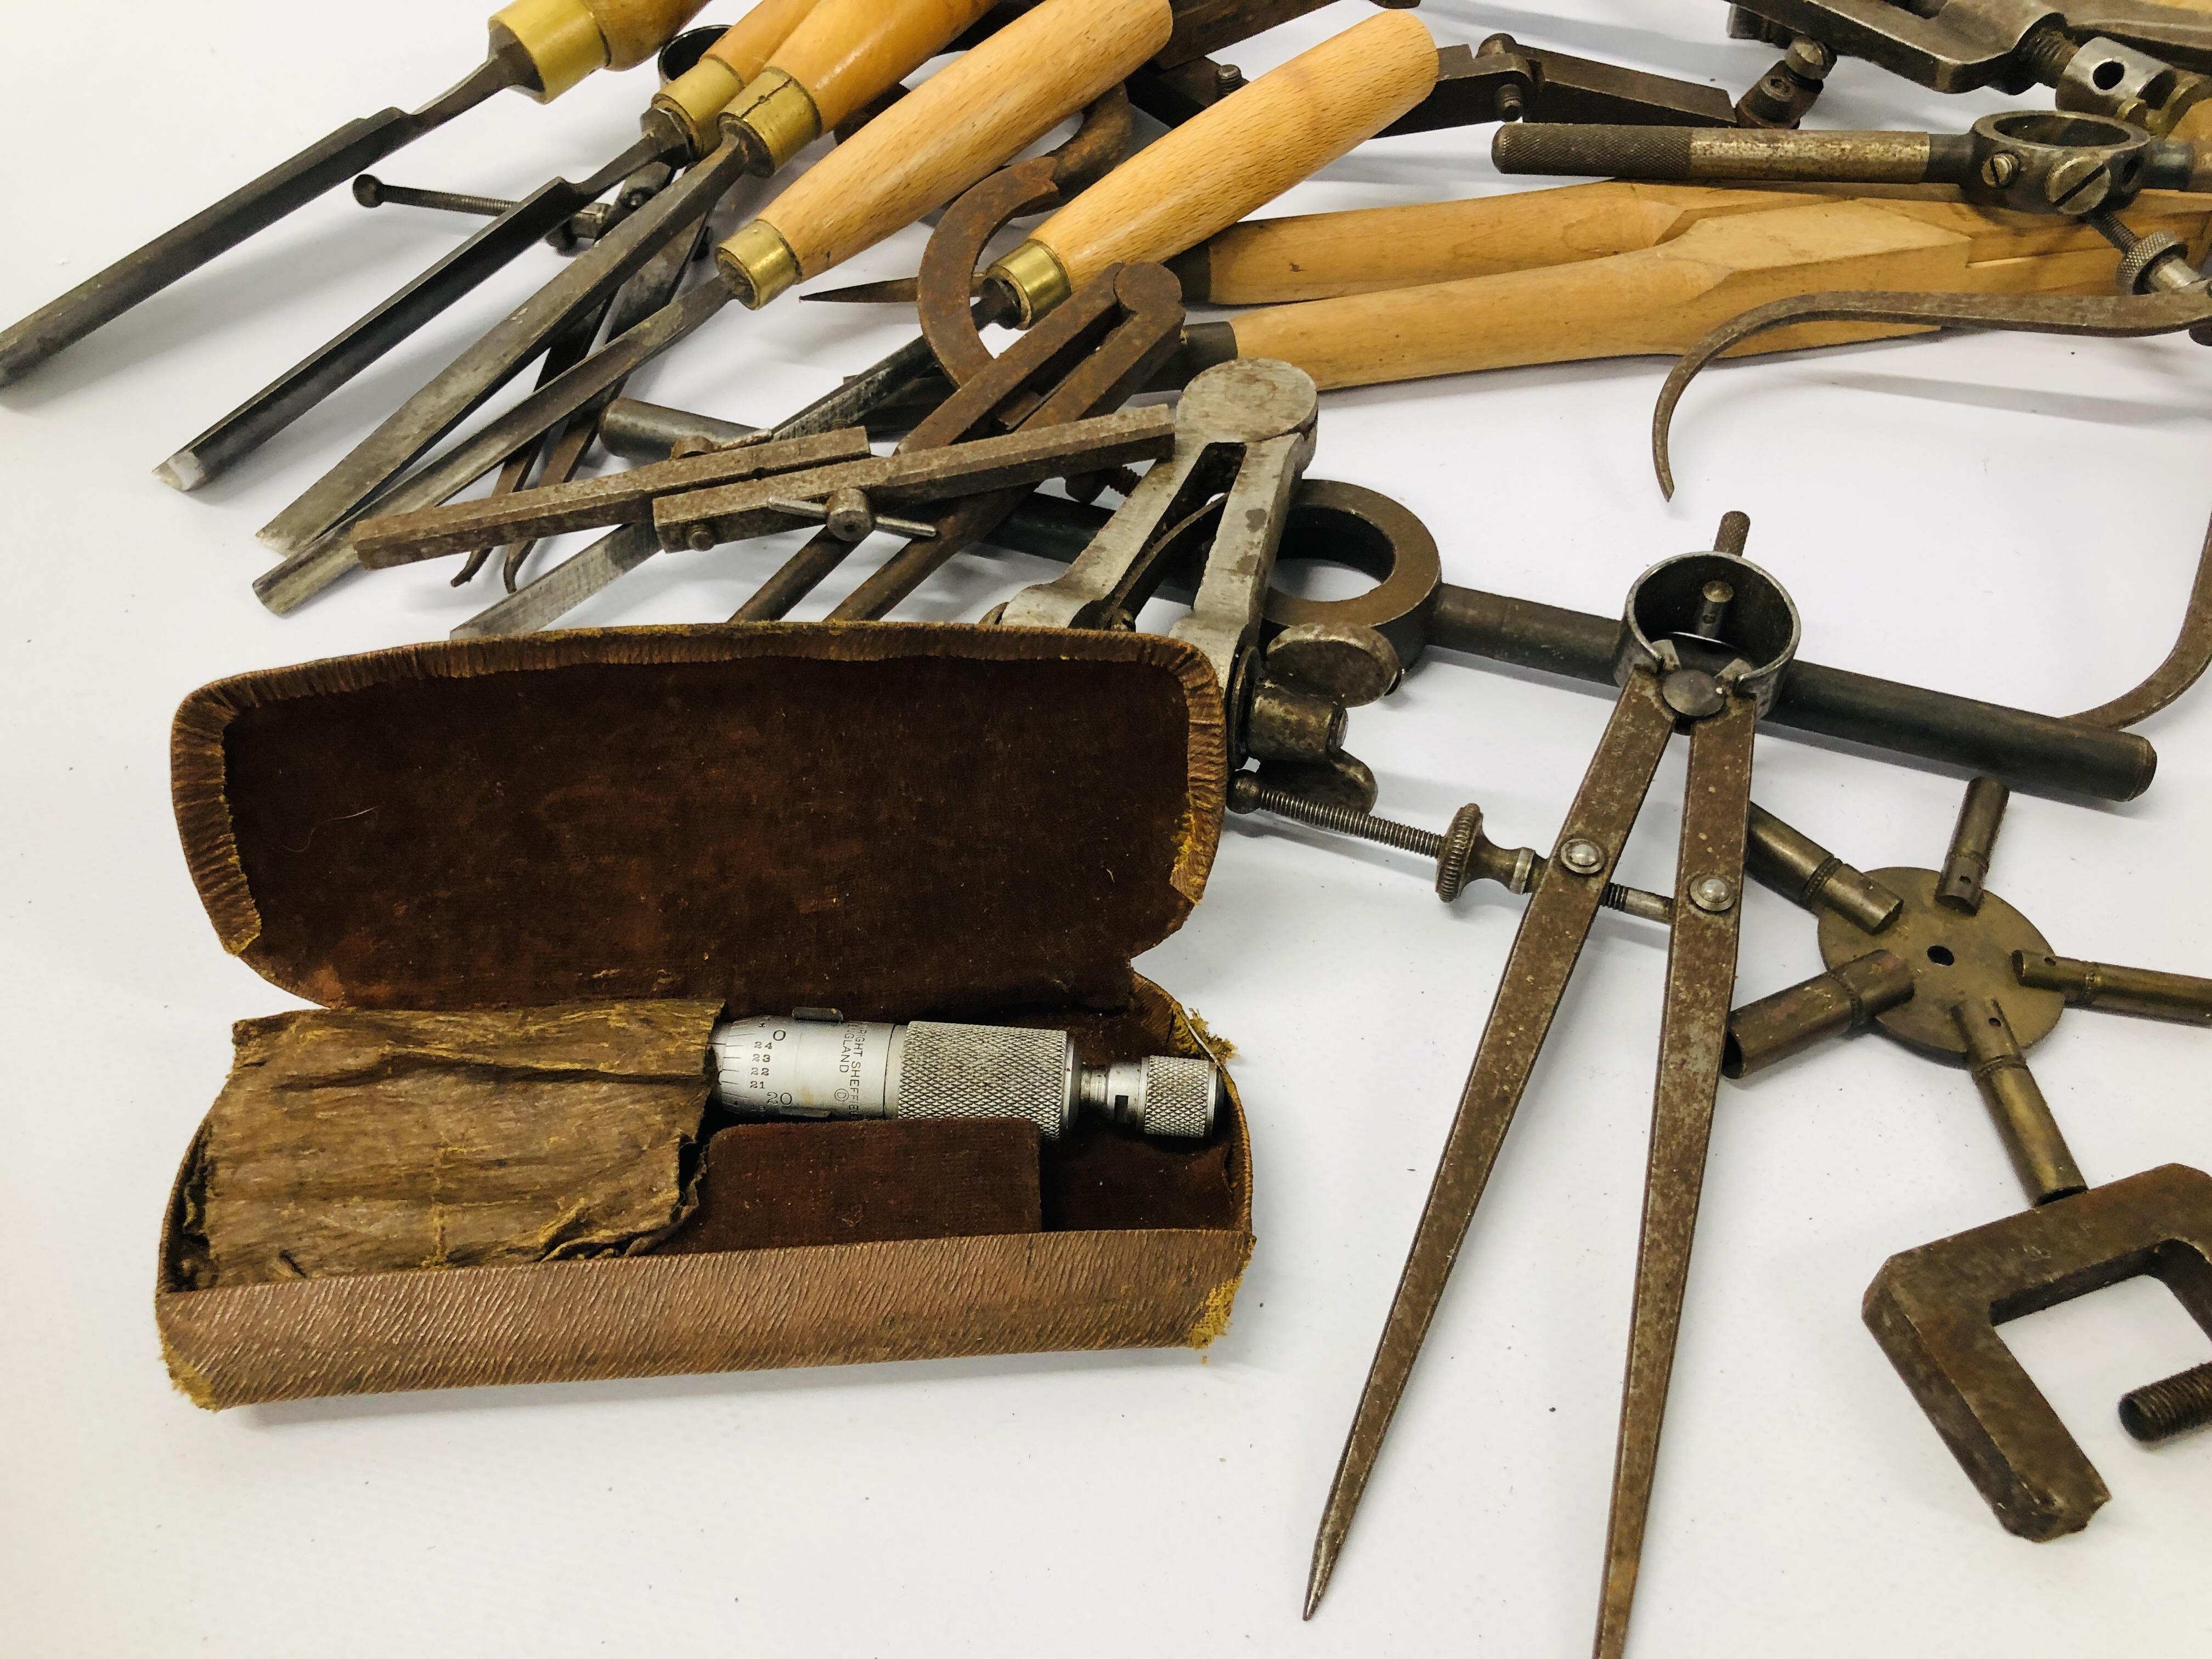 BOX OF ASSORTED VINTAGE TOOLS TO INCLUDE VARIOUS PRECISION MEASURING INSTRUMENTS, ETC. - Image 8 of 8